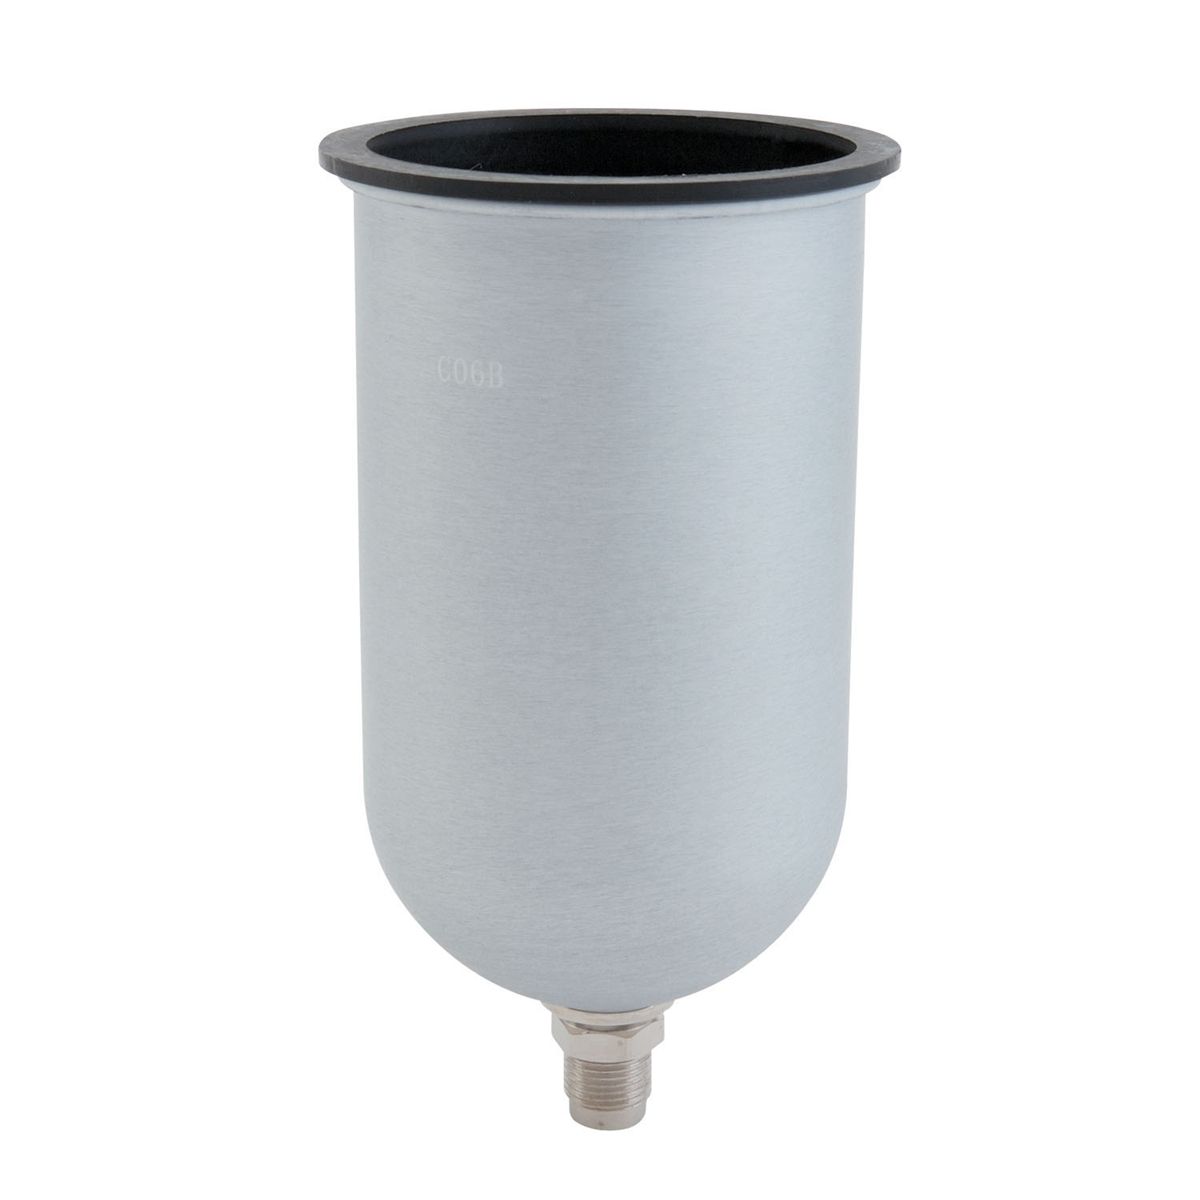 Aluminum Gravity Feed Cup - 34 Ounce/1 Liter Capacity